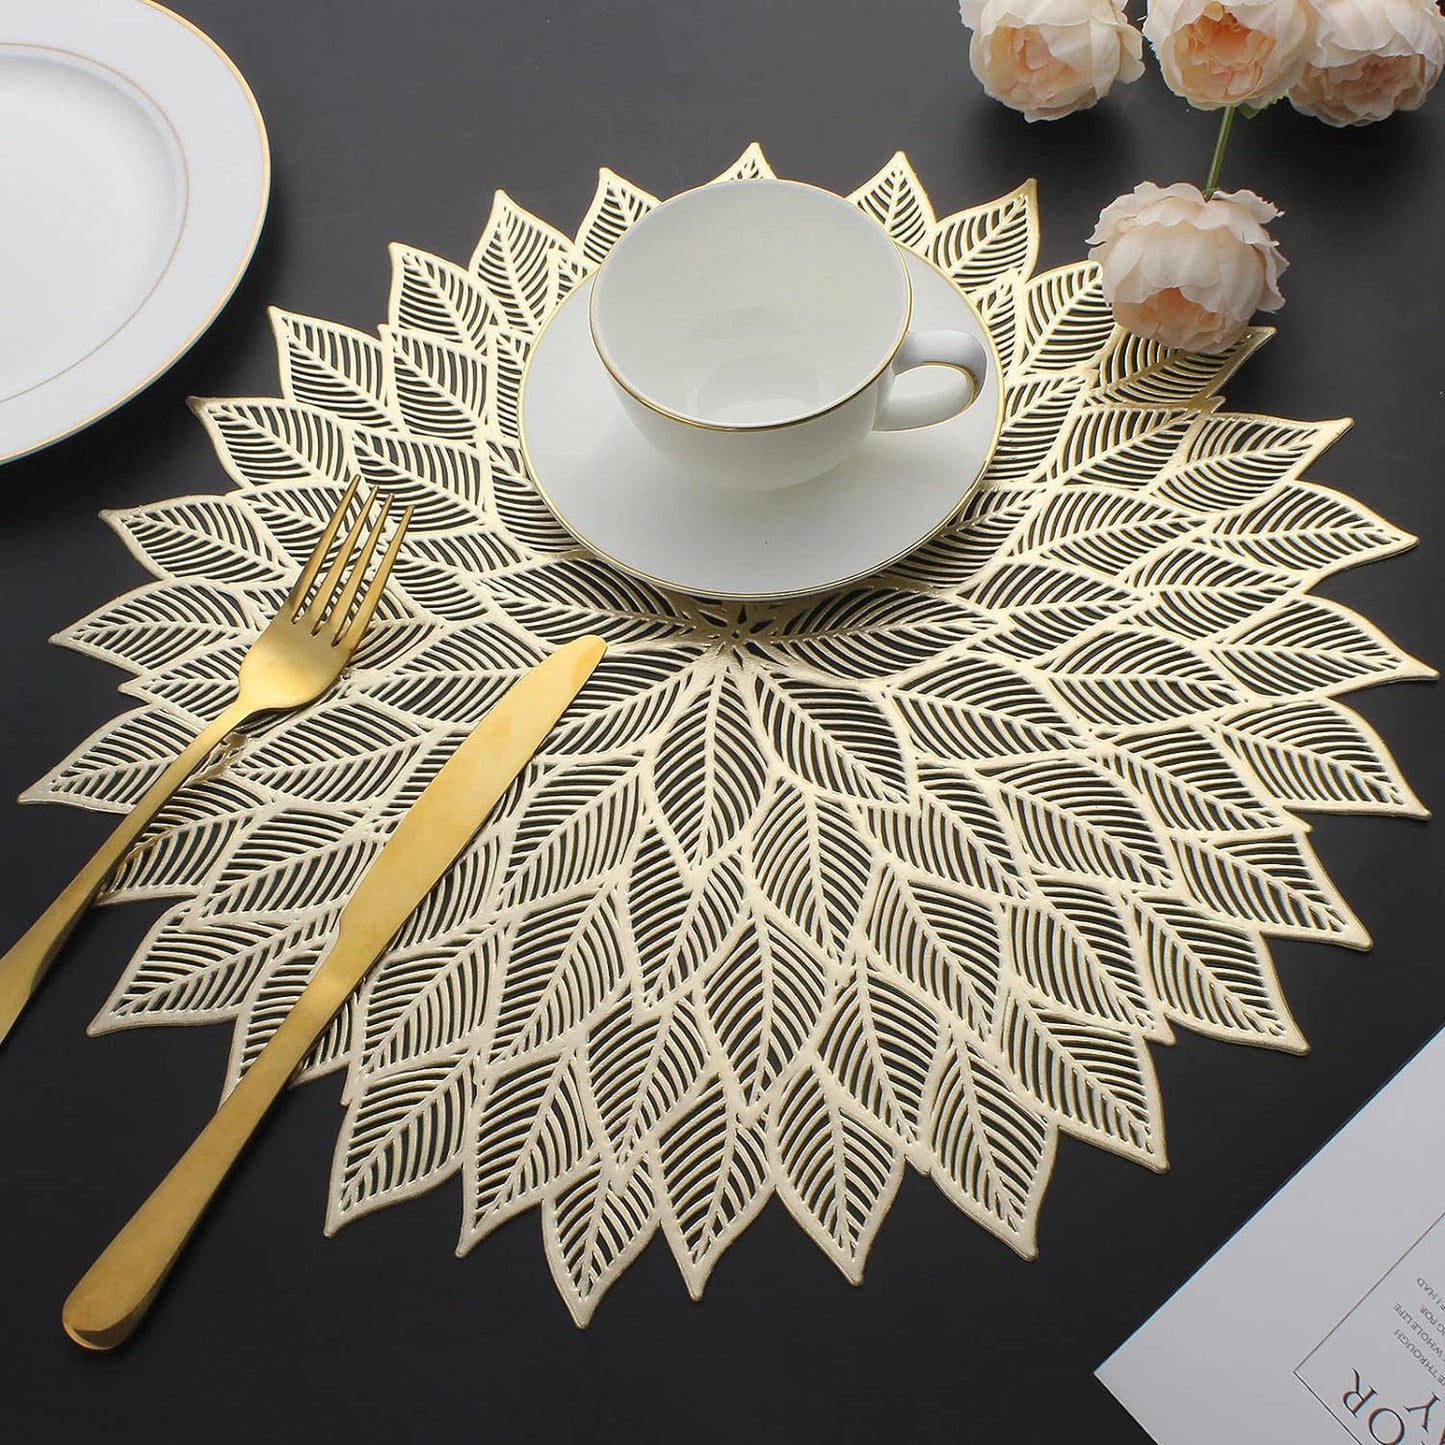 Placemats Set of 12, Round Hollow Out Flowers Place Mats for Dining Table Pressed Vinyl Blooming Leaf Table Mats for Holiday Party Wedding Accent Centerpiece Dinner Table Decoration (Gold)